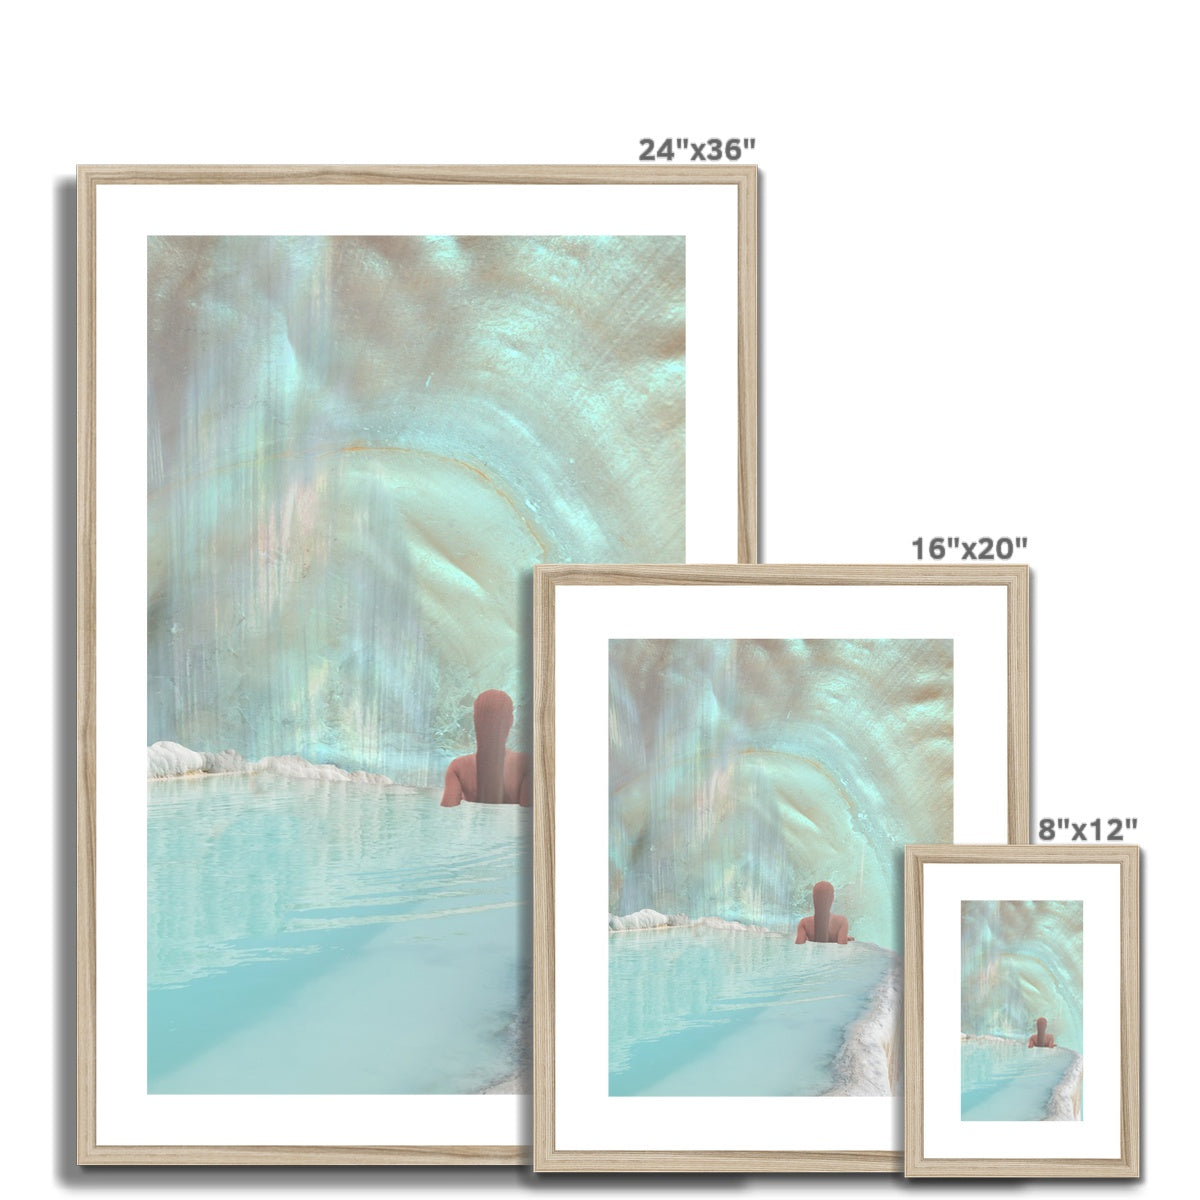 Restful Pause Framed & Mounted Print - Starseed Designs Inc.